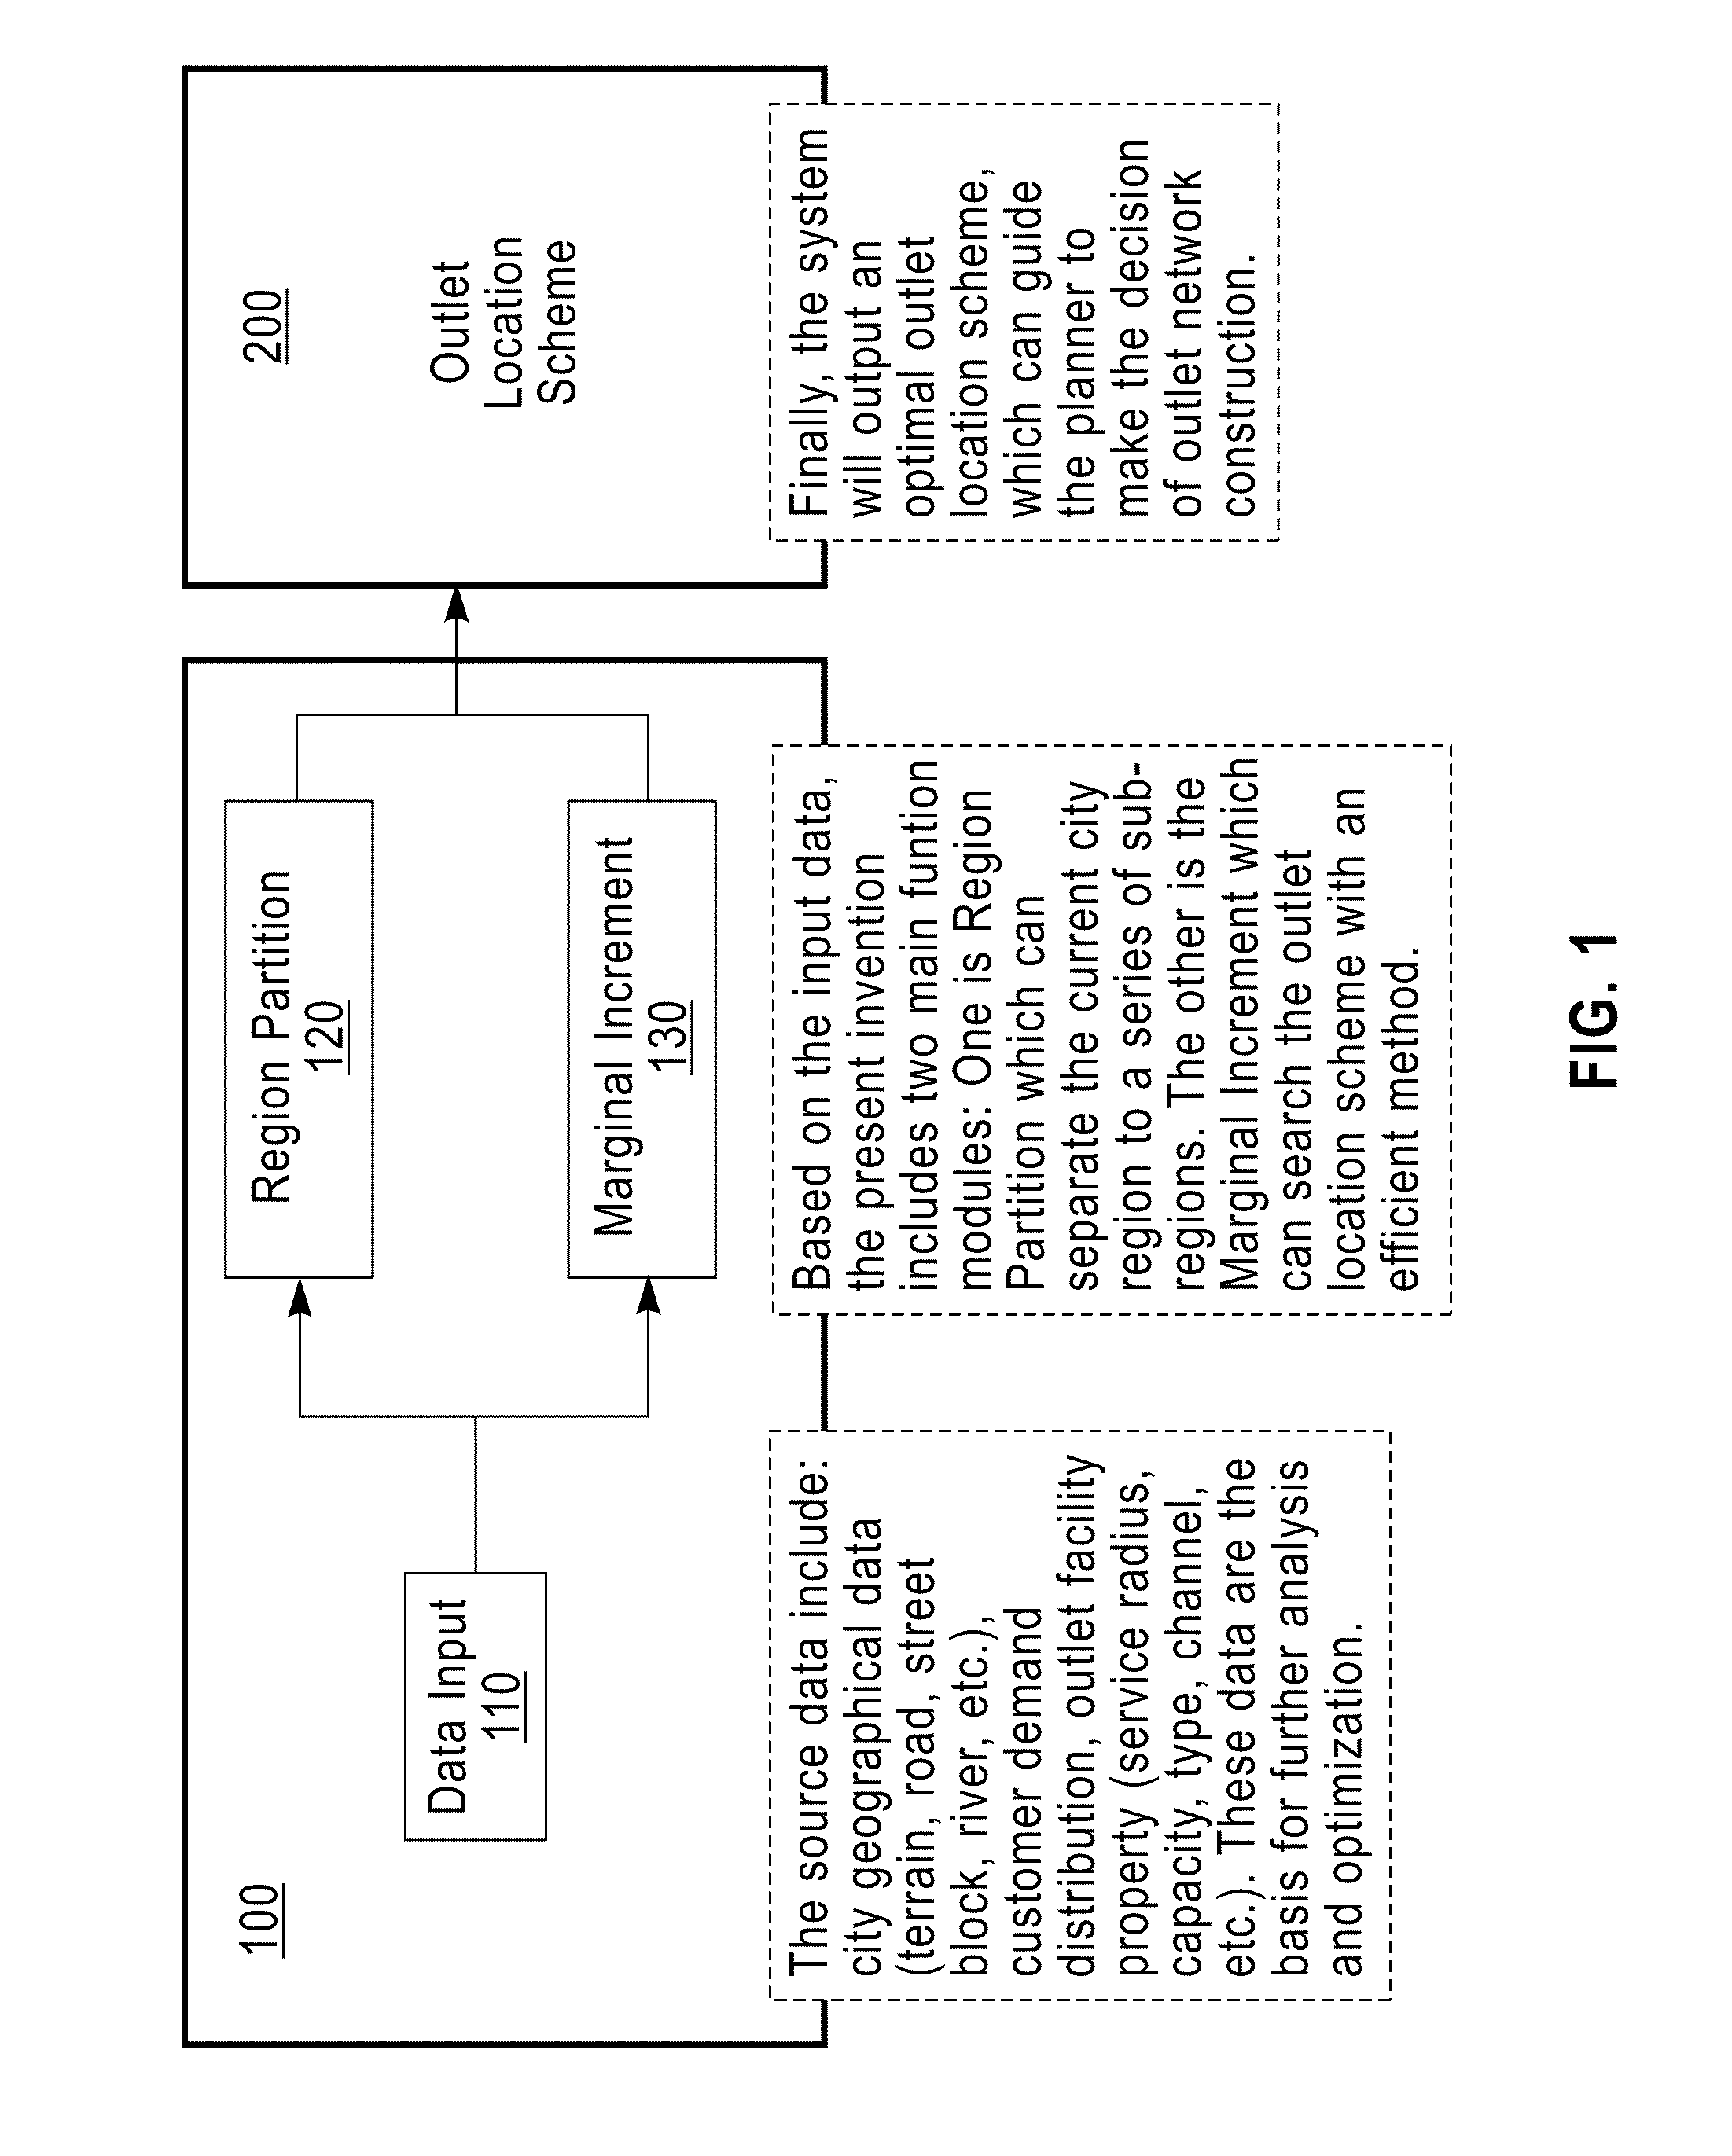 Method and apparatus for outlet location selection using the market region partition and marginal increment assignment algorithm